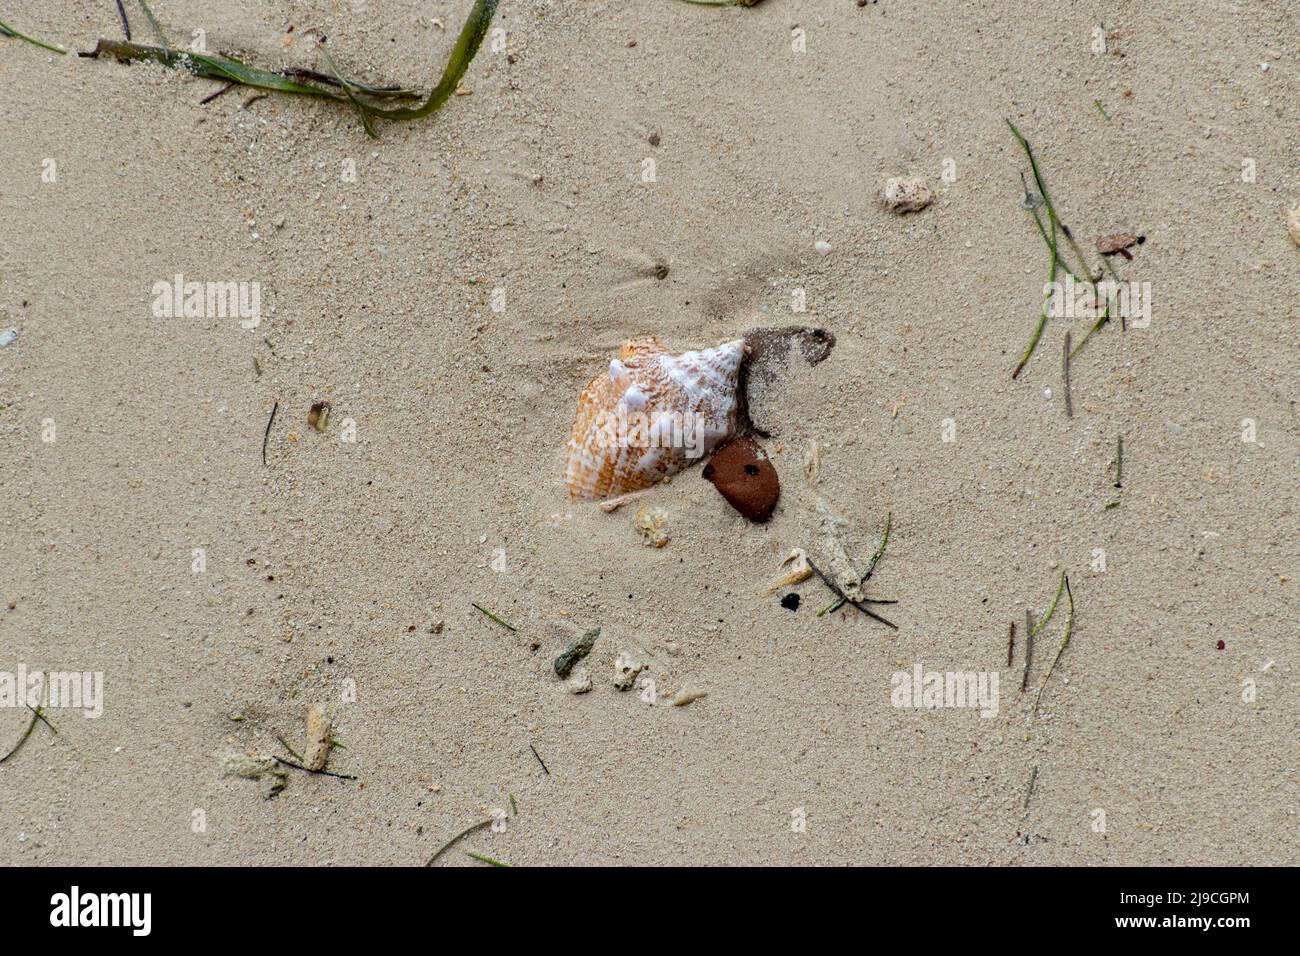 A sea shell embedded in a sand beach at Dry Tortugas National Park Stock Photo